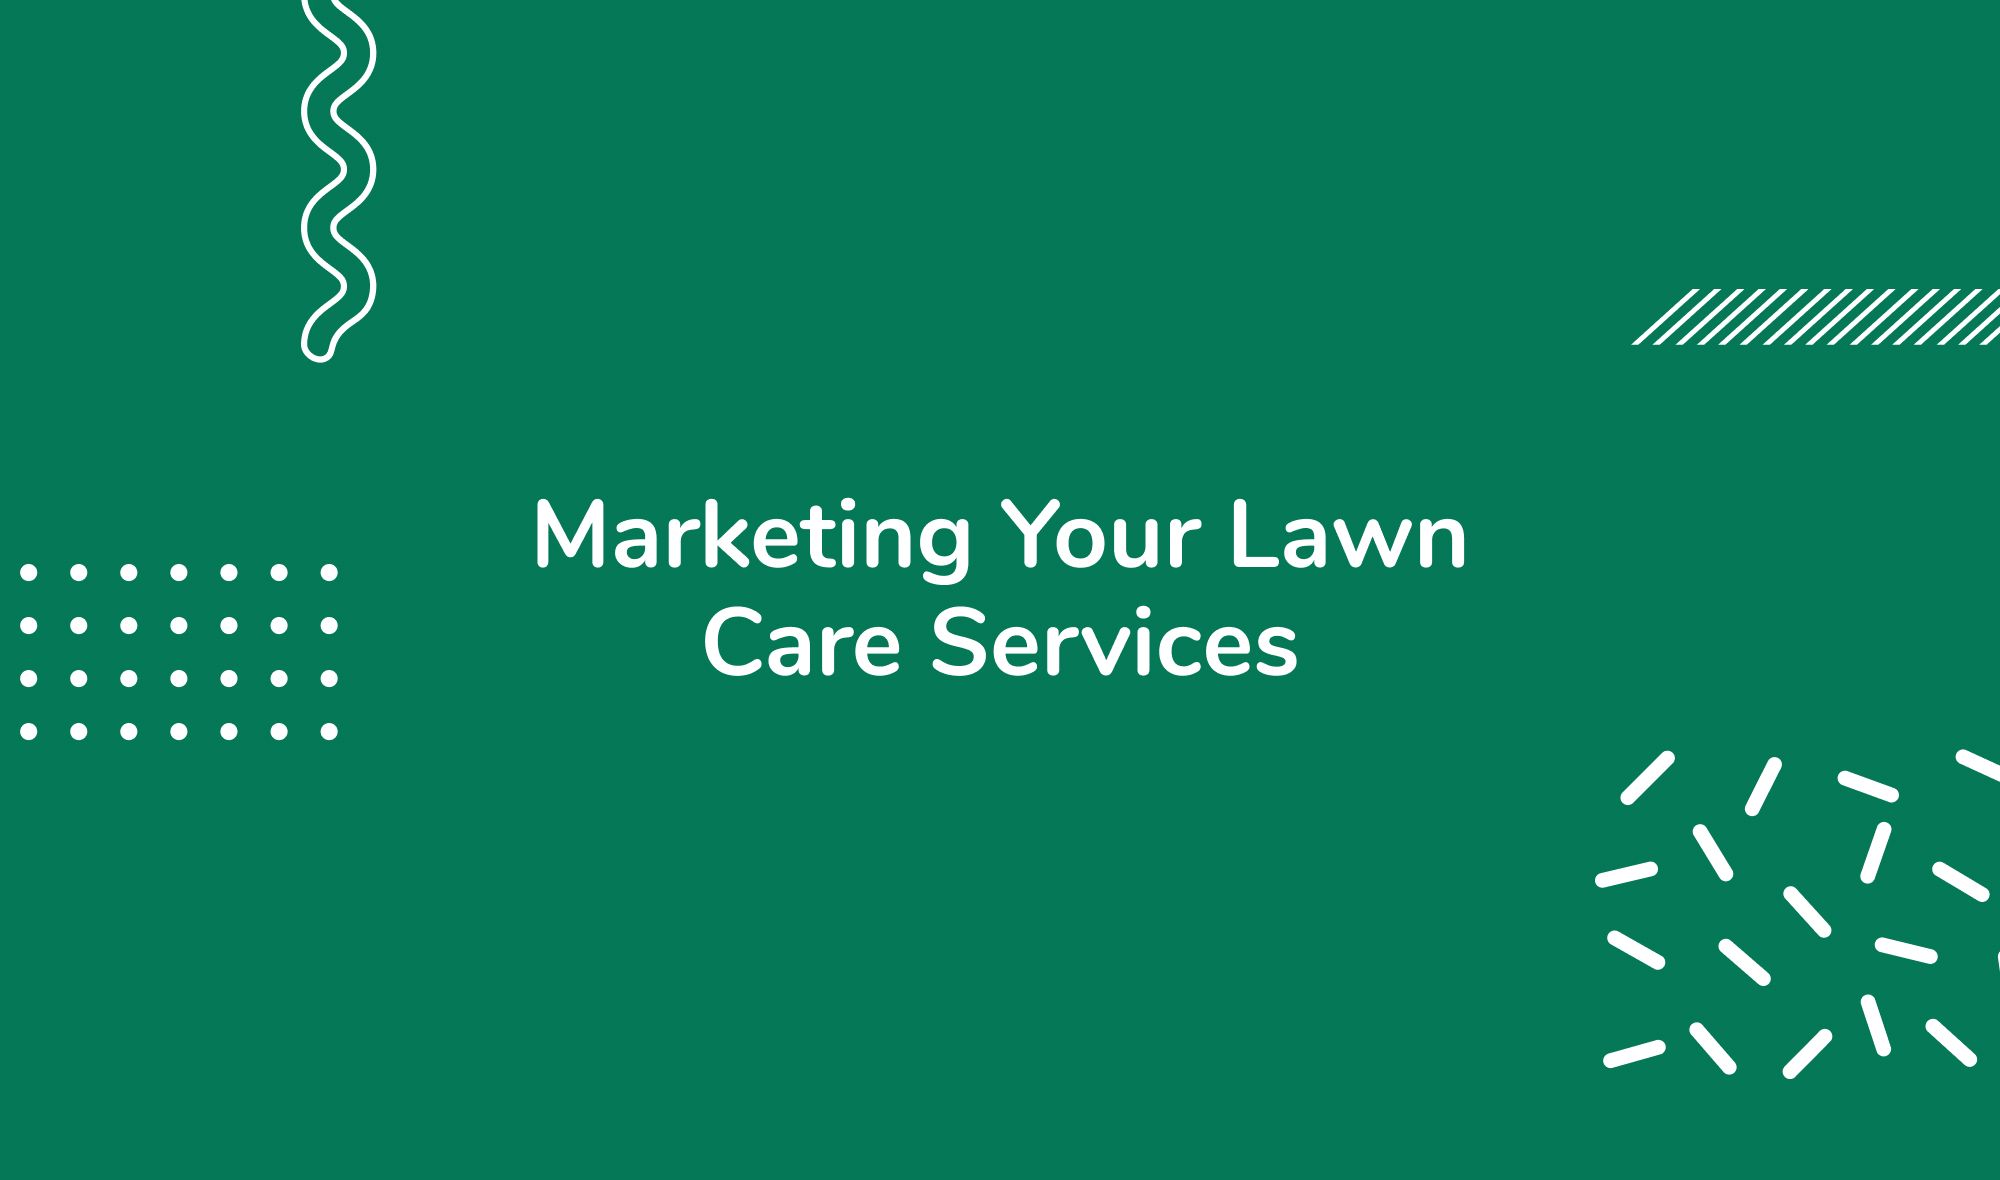 Marketing Your Lawn Care Services